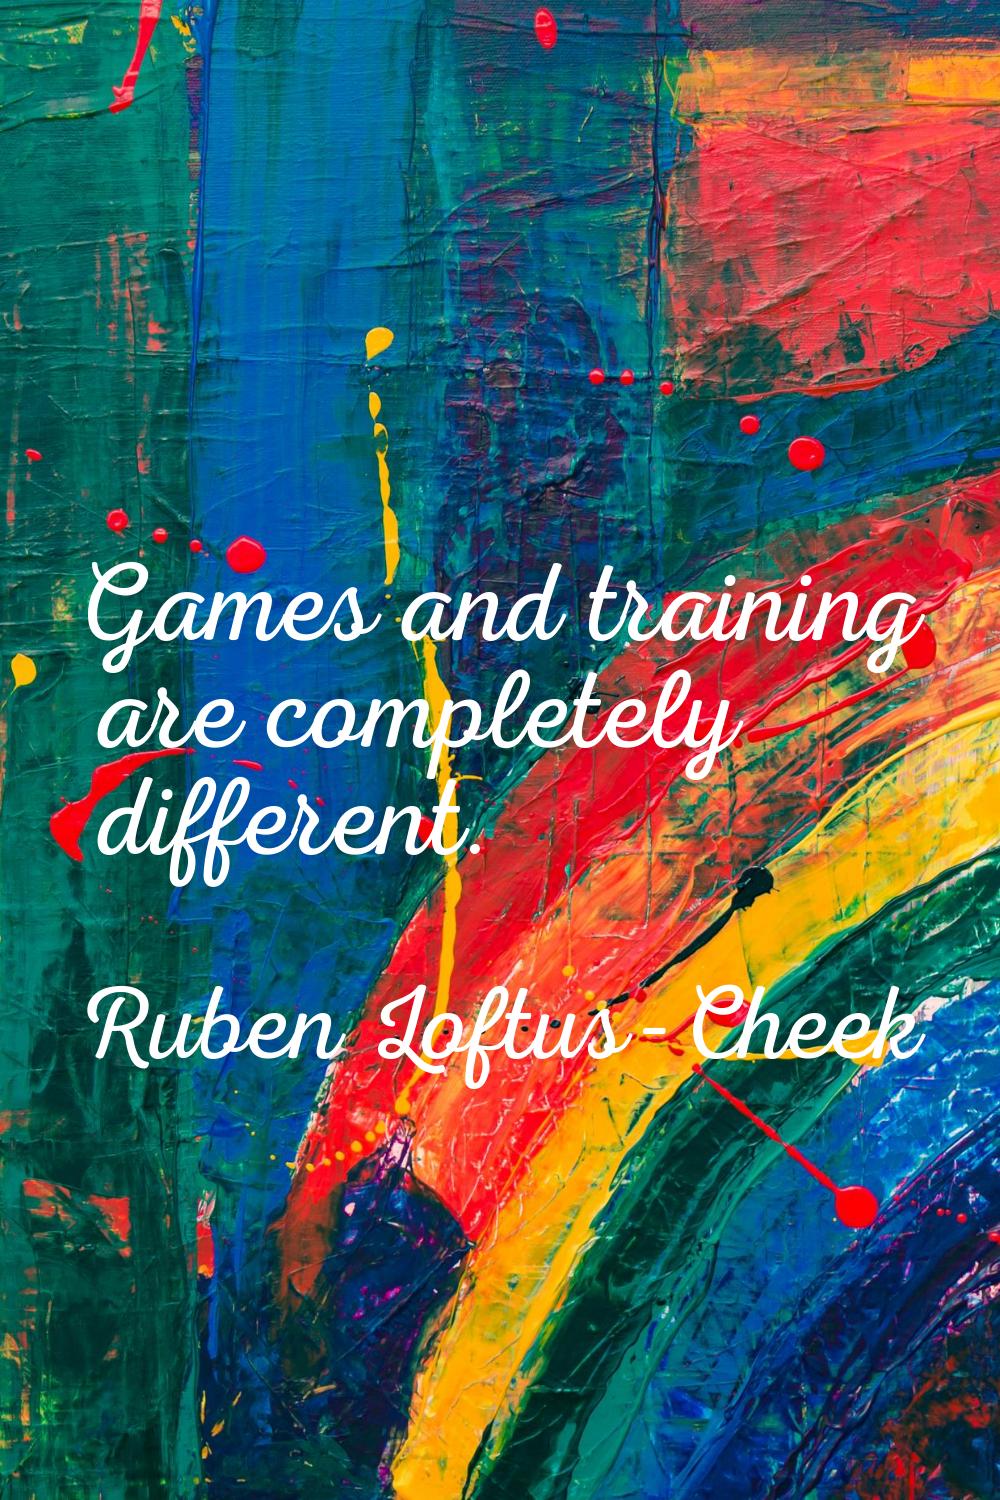 Games and training are completely different.